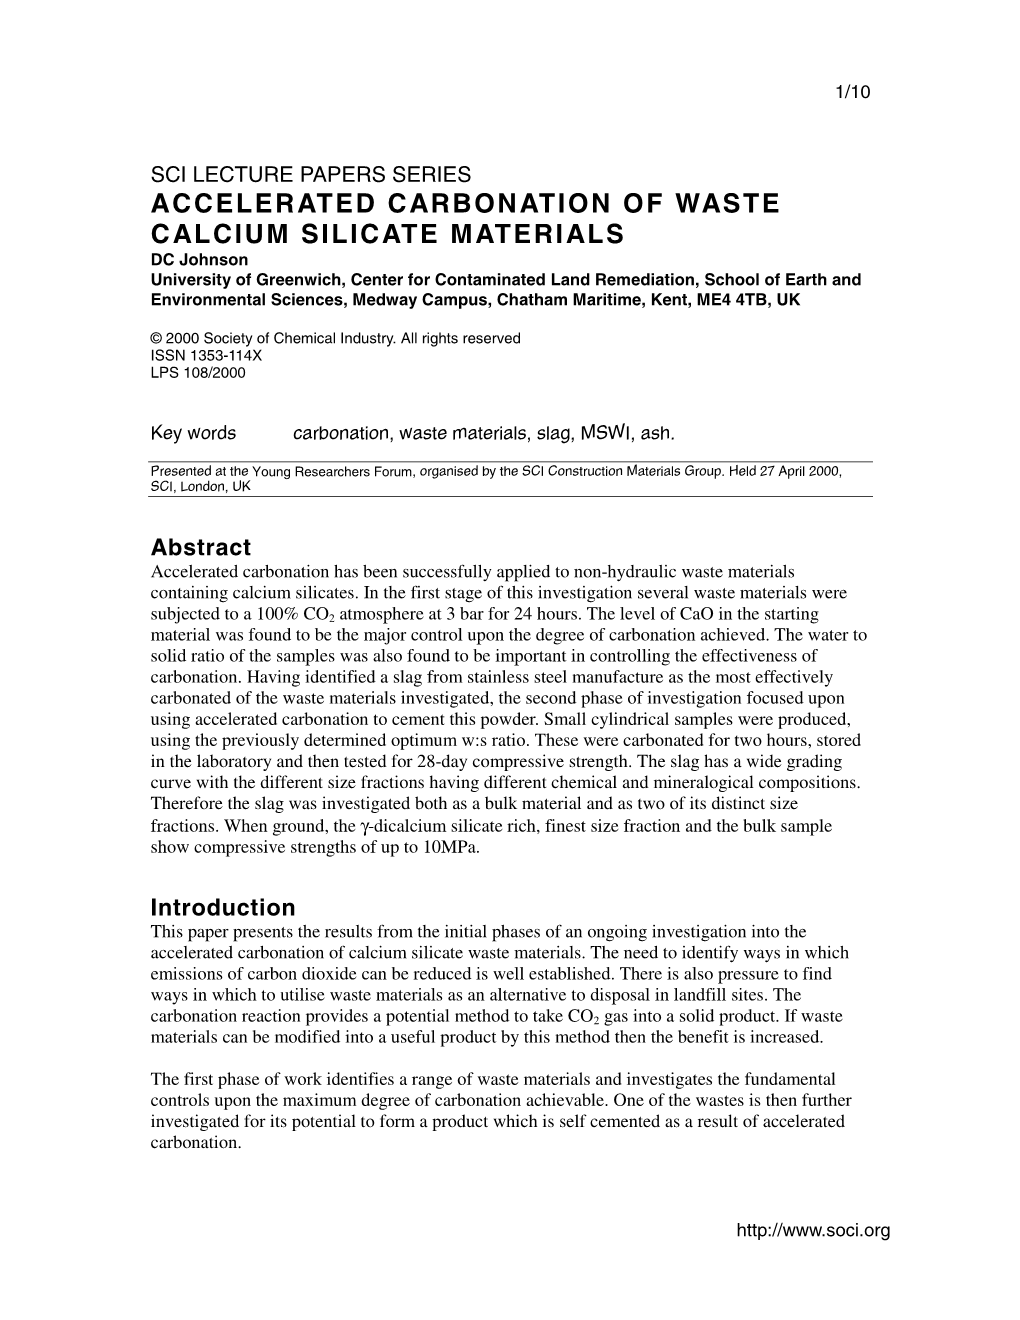 Accelerated Carbonation of Waste Calcium Silicate